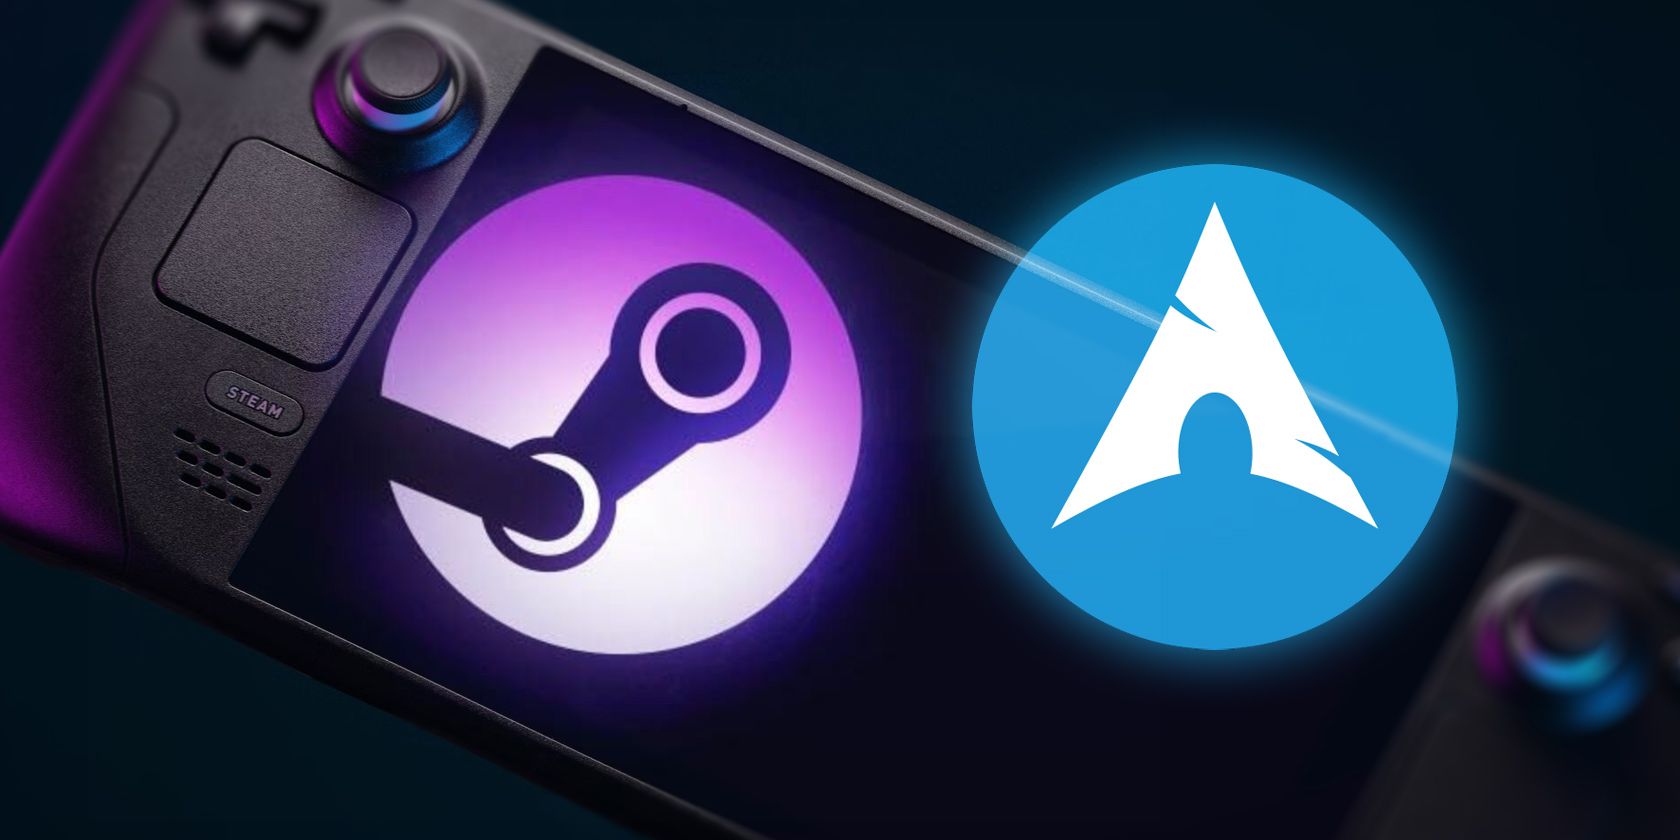 SteamOS and Arch Linux logos on top of a Steam Deck